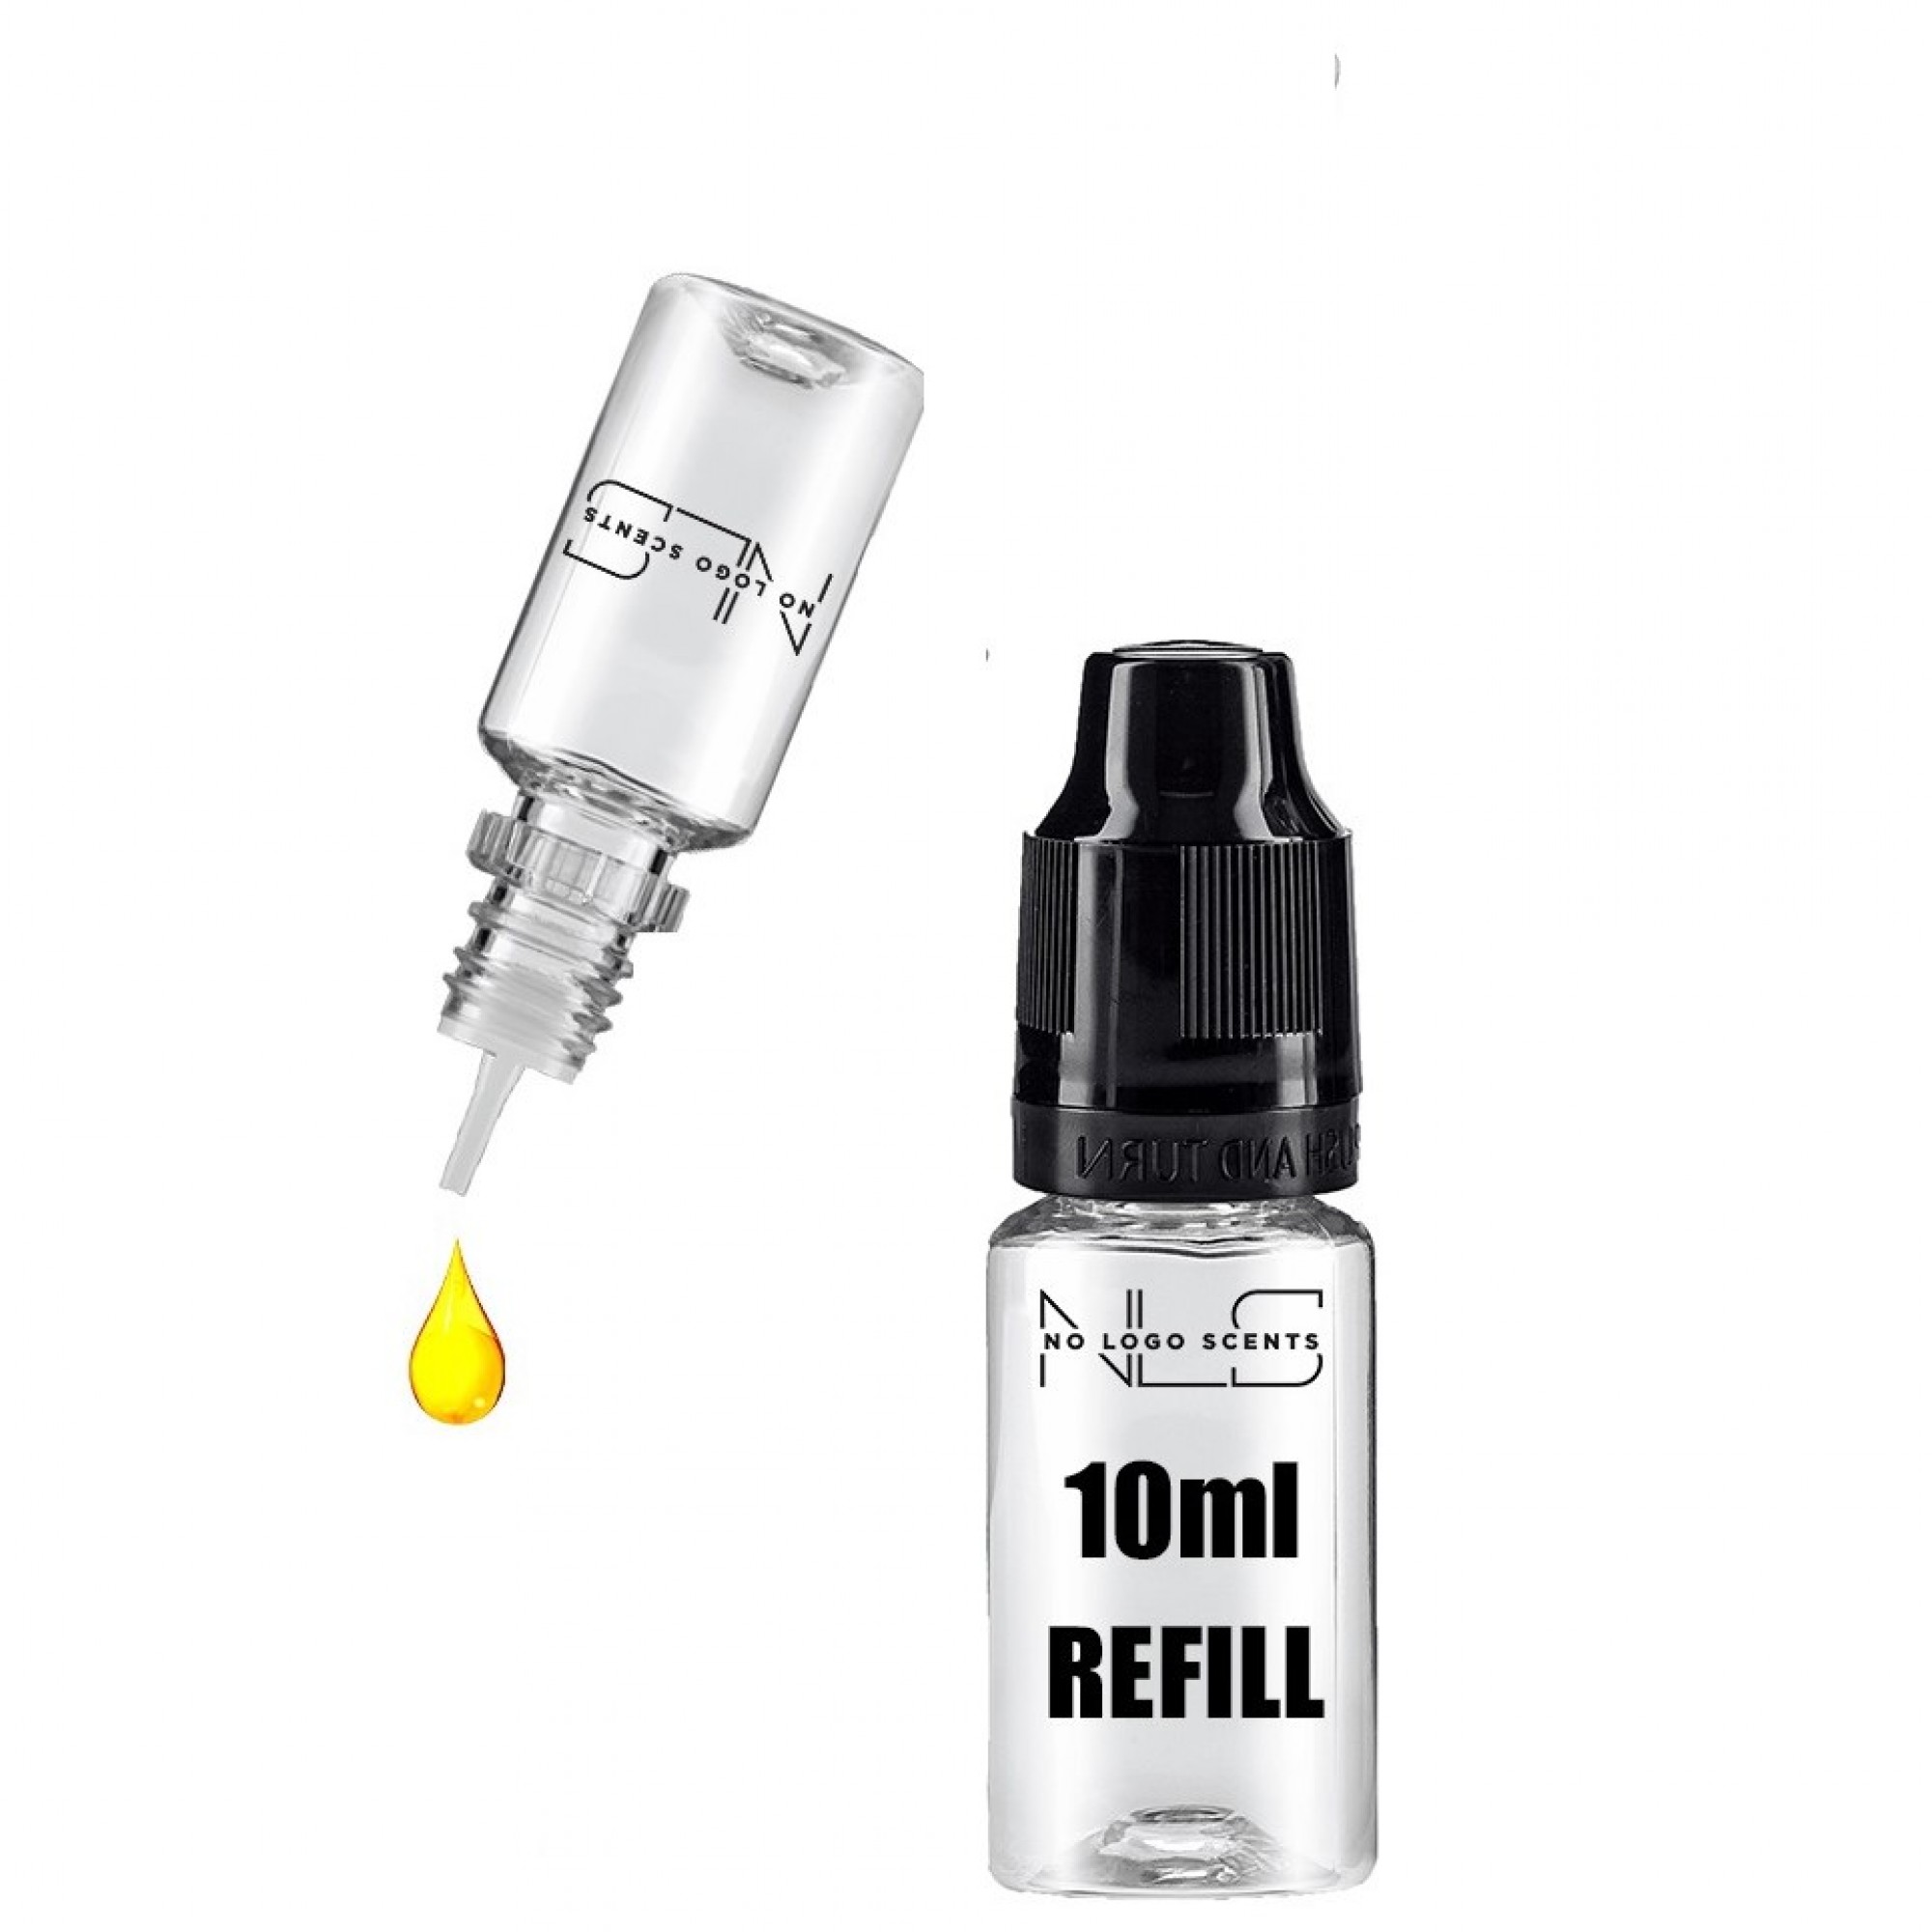 10ml Car Diffuser Refill from category HOME & CAR - 1